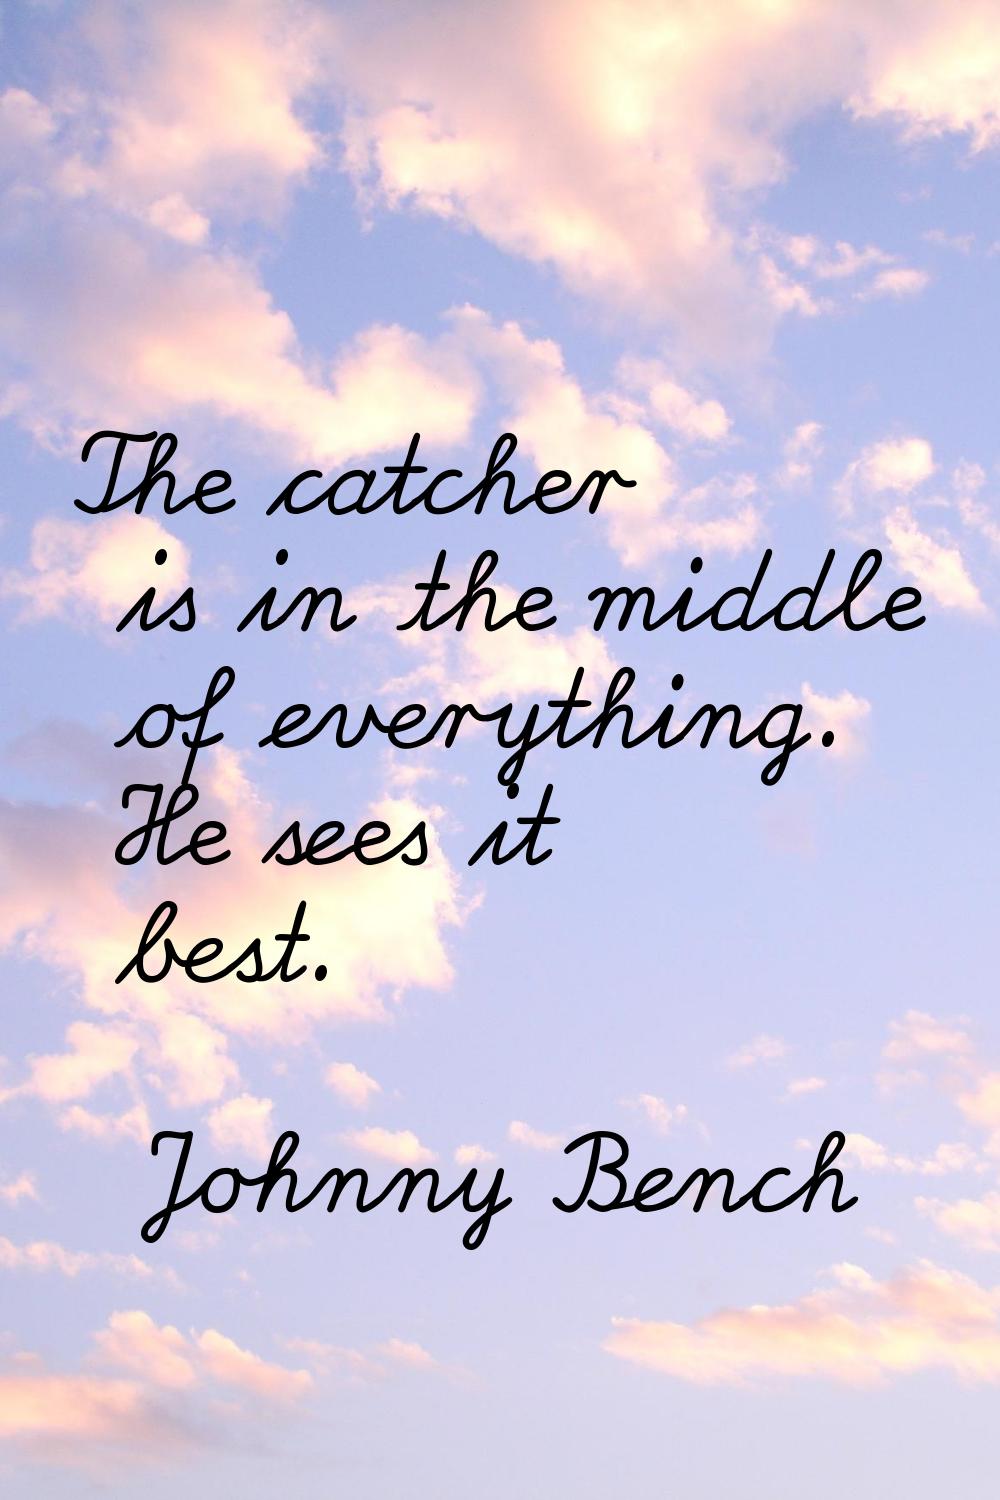 The catcher is in the middle of everything. He sees it best.